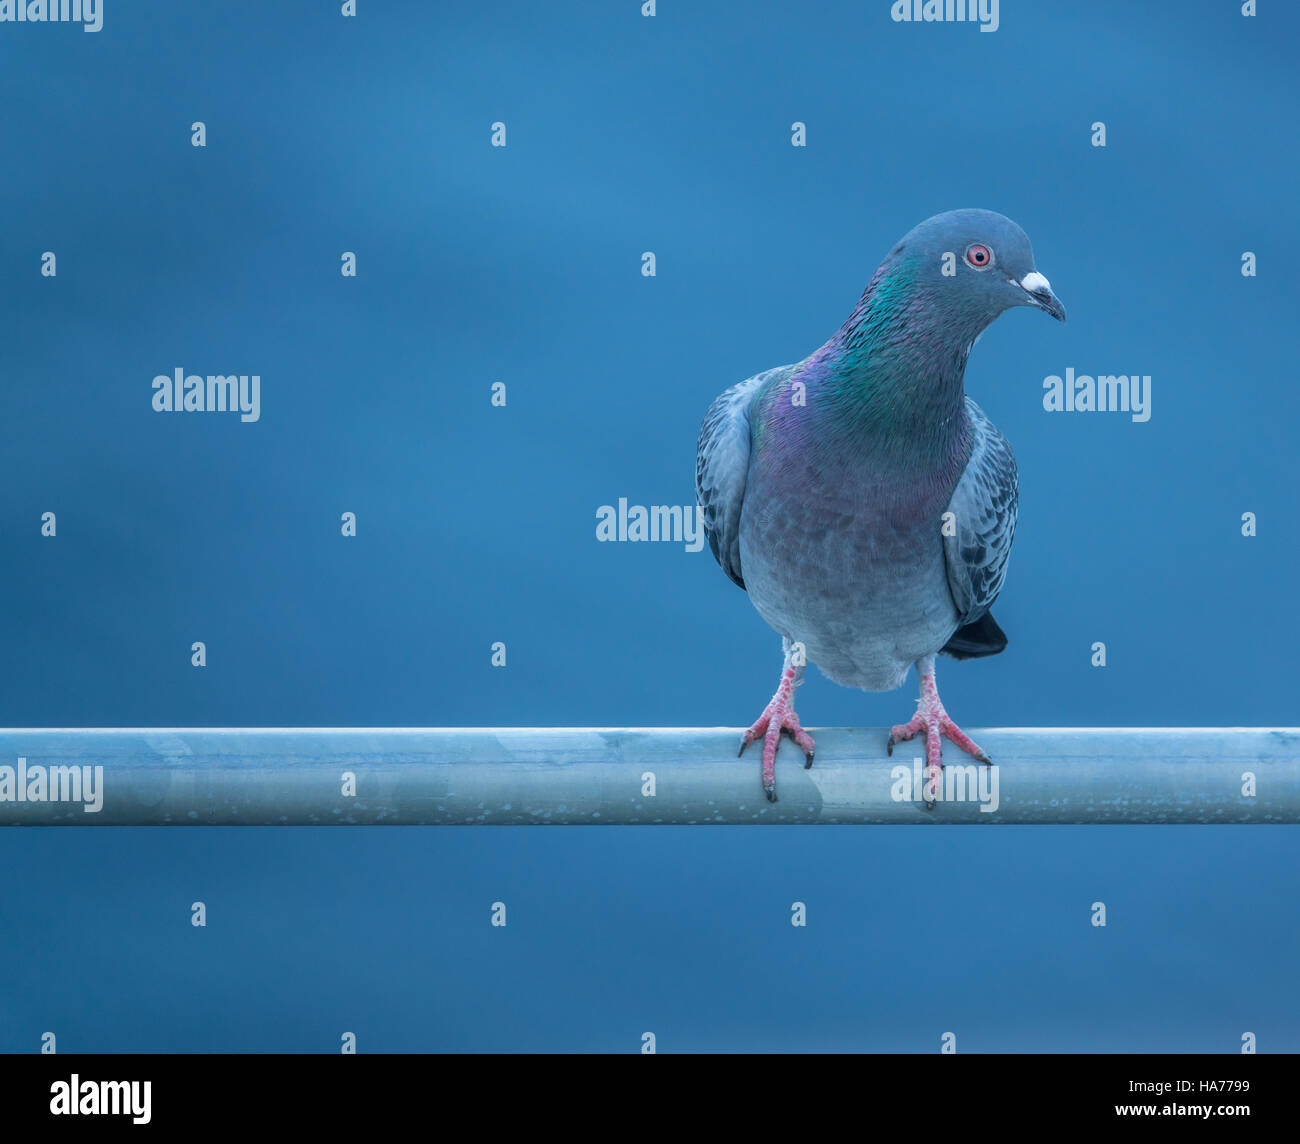 Inquisitive Pigeon Against Blue Water With Copy Space Stock Photo